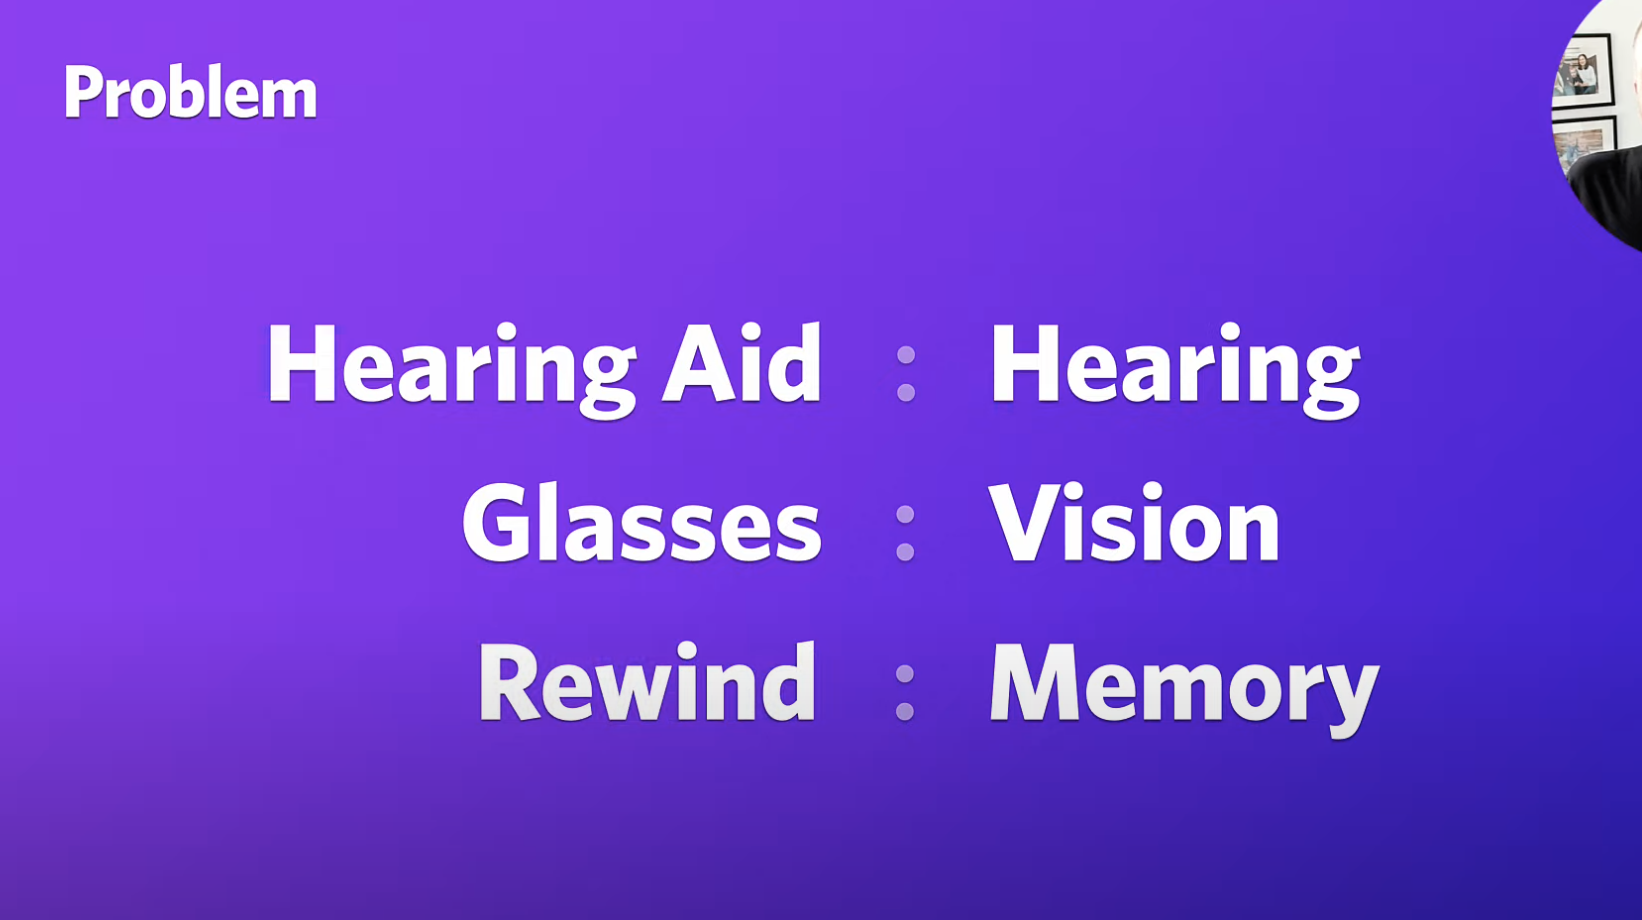 pitch slide showing rewind as the glasses for memory